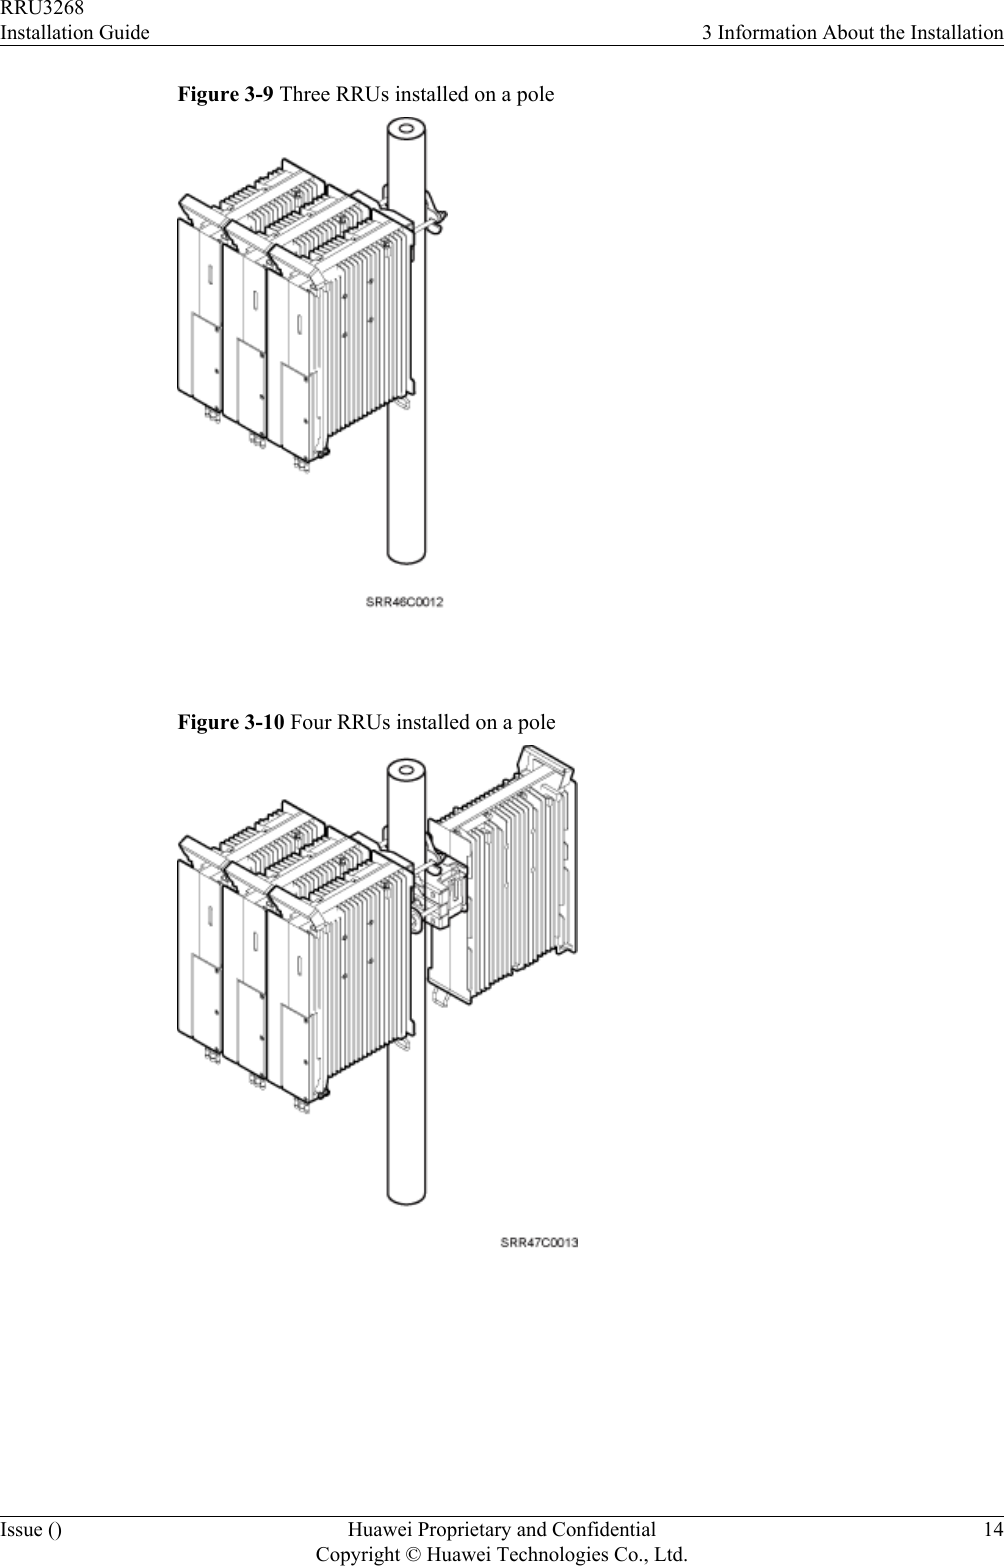 Figure 3-9 Three RRUs installed on a pole Figure 3-10 Four RRUs installed on a pole RRU3268Installation Guide 3 Information About the InstallationIssue () Huawei Proprietary and ConfidentialCopyright © Huawei Technologies Co., Ltd.14